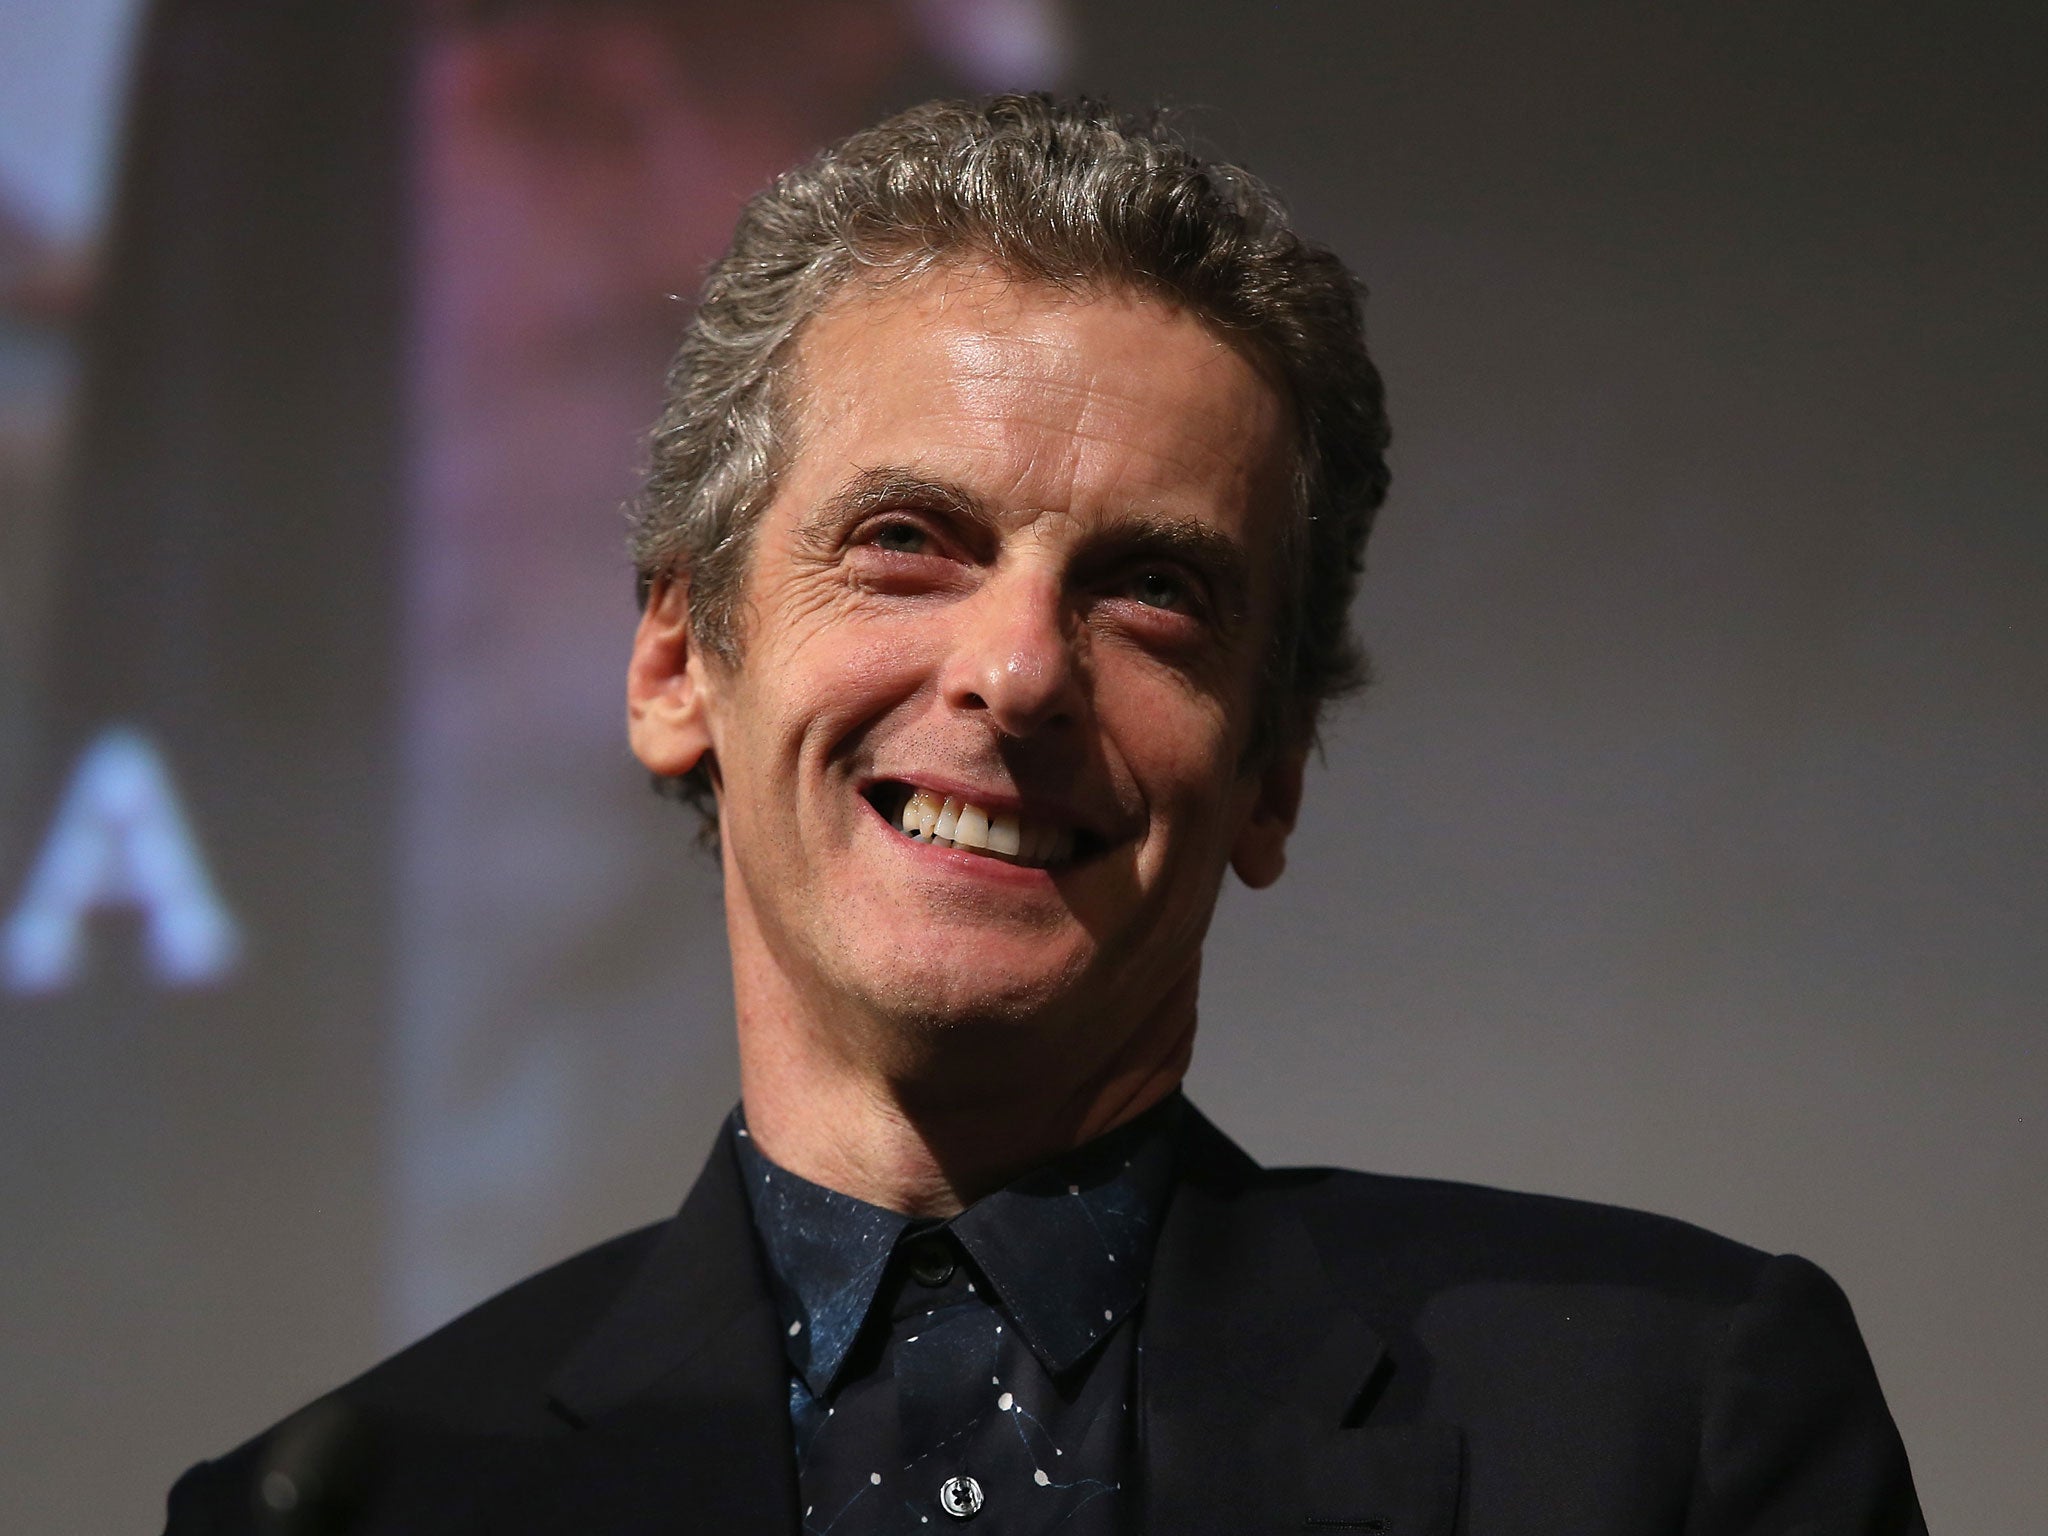 Doctor Who actor Peter Capaldi at last night's screening of 'Deep Breath' at the BFI in London